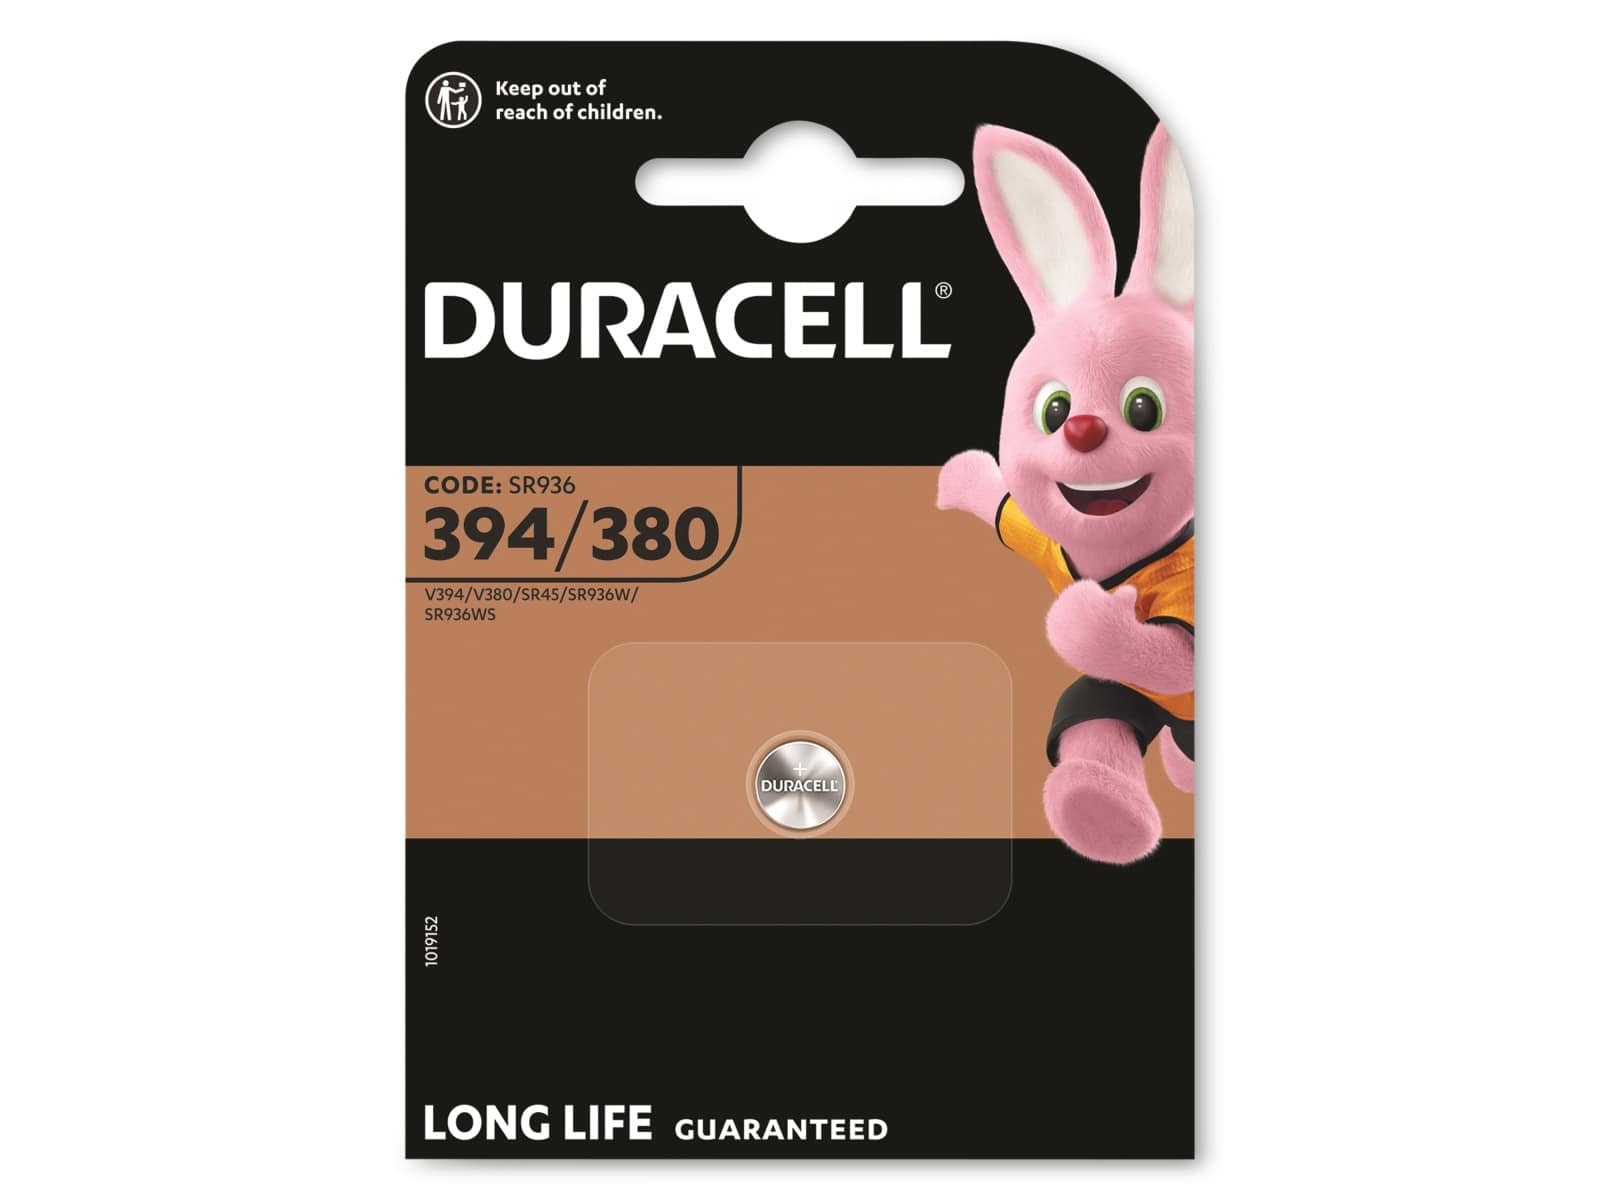 DURACELL Silver Oxide-Knopfzelle SR45, 1.5V, Watch